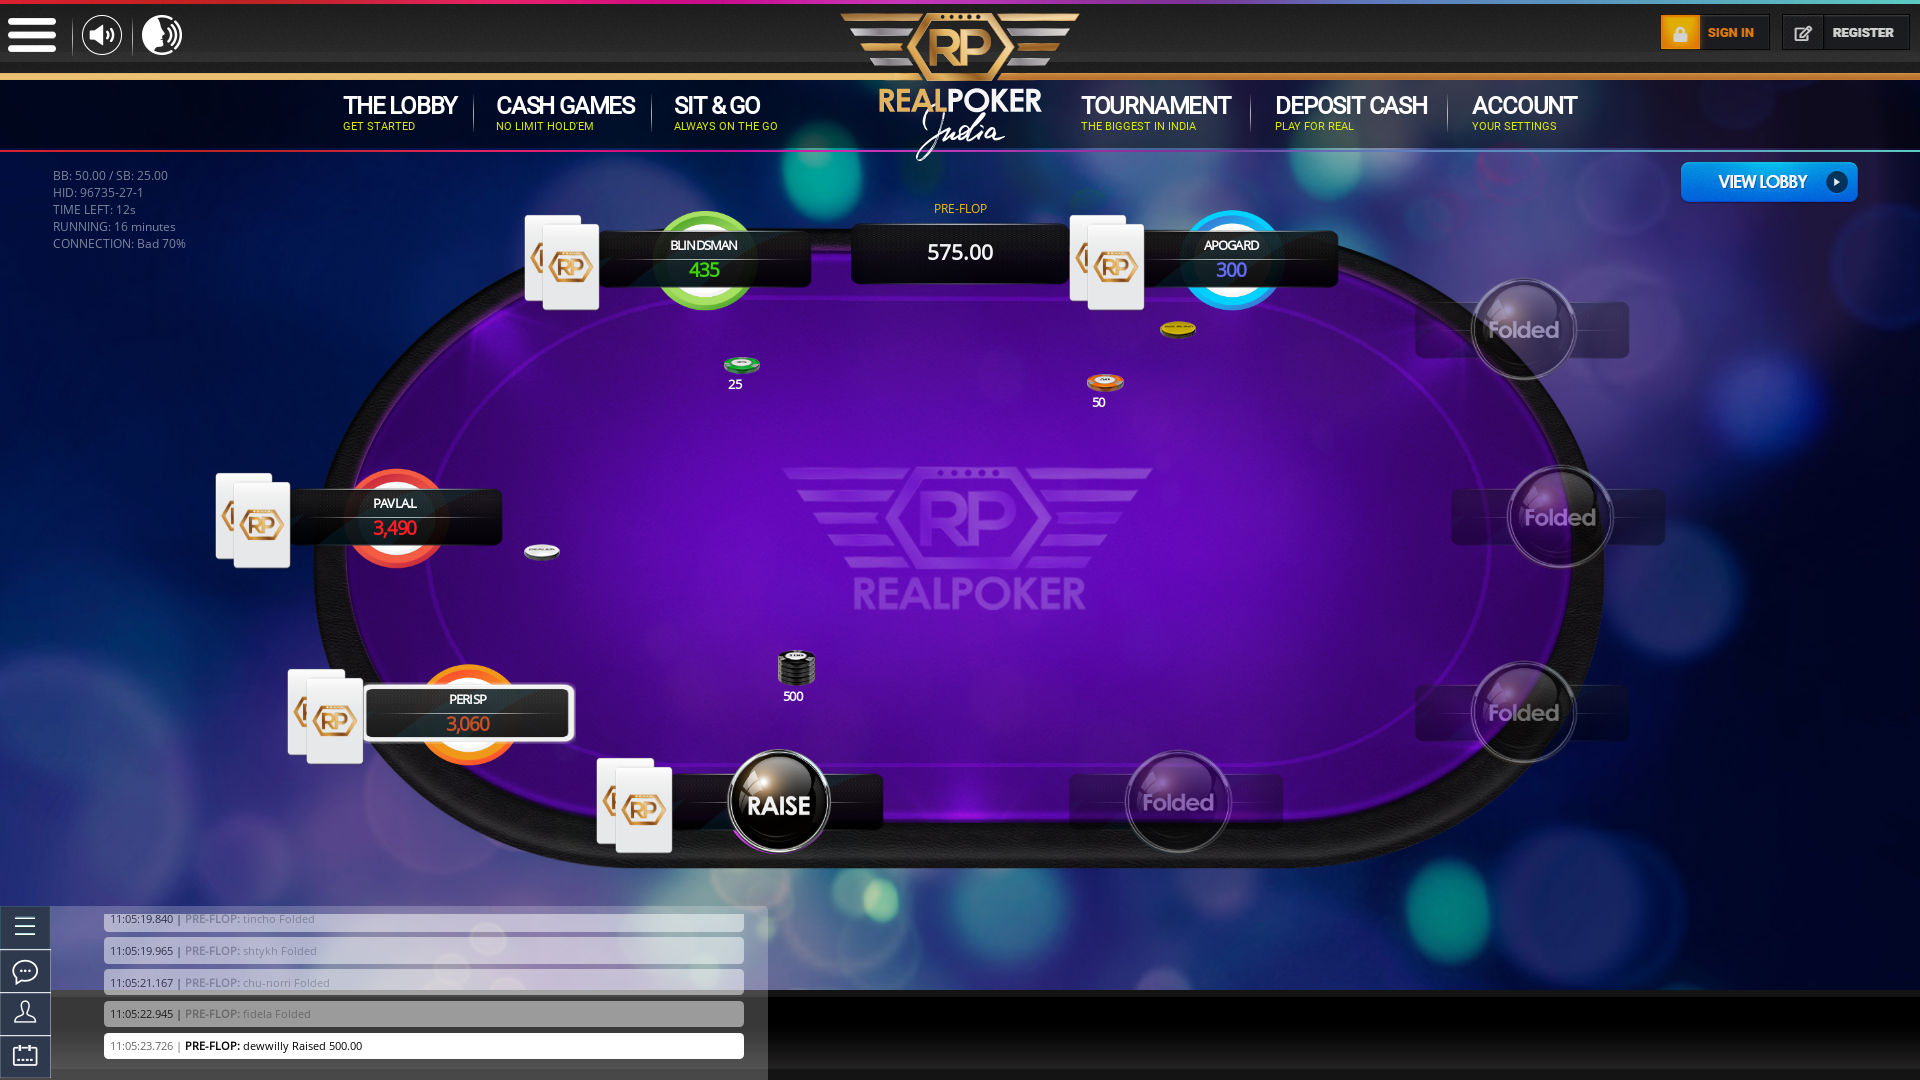 Real poker 10 player table in the 16th minute of the match